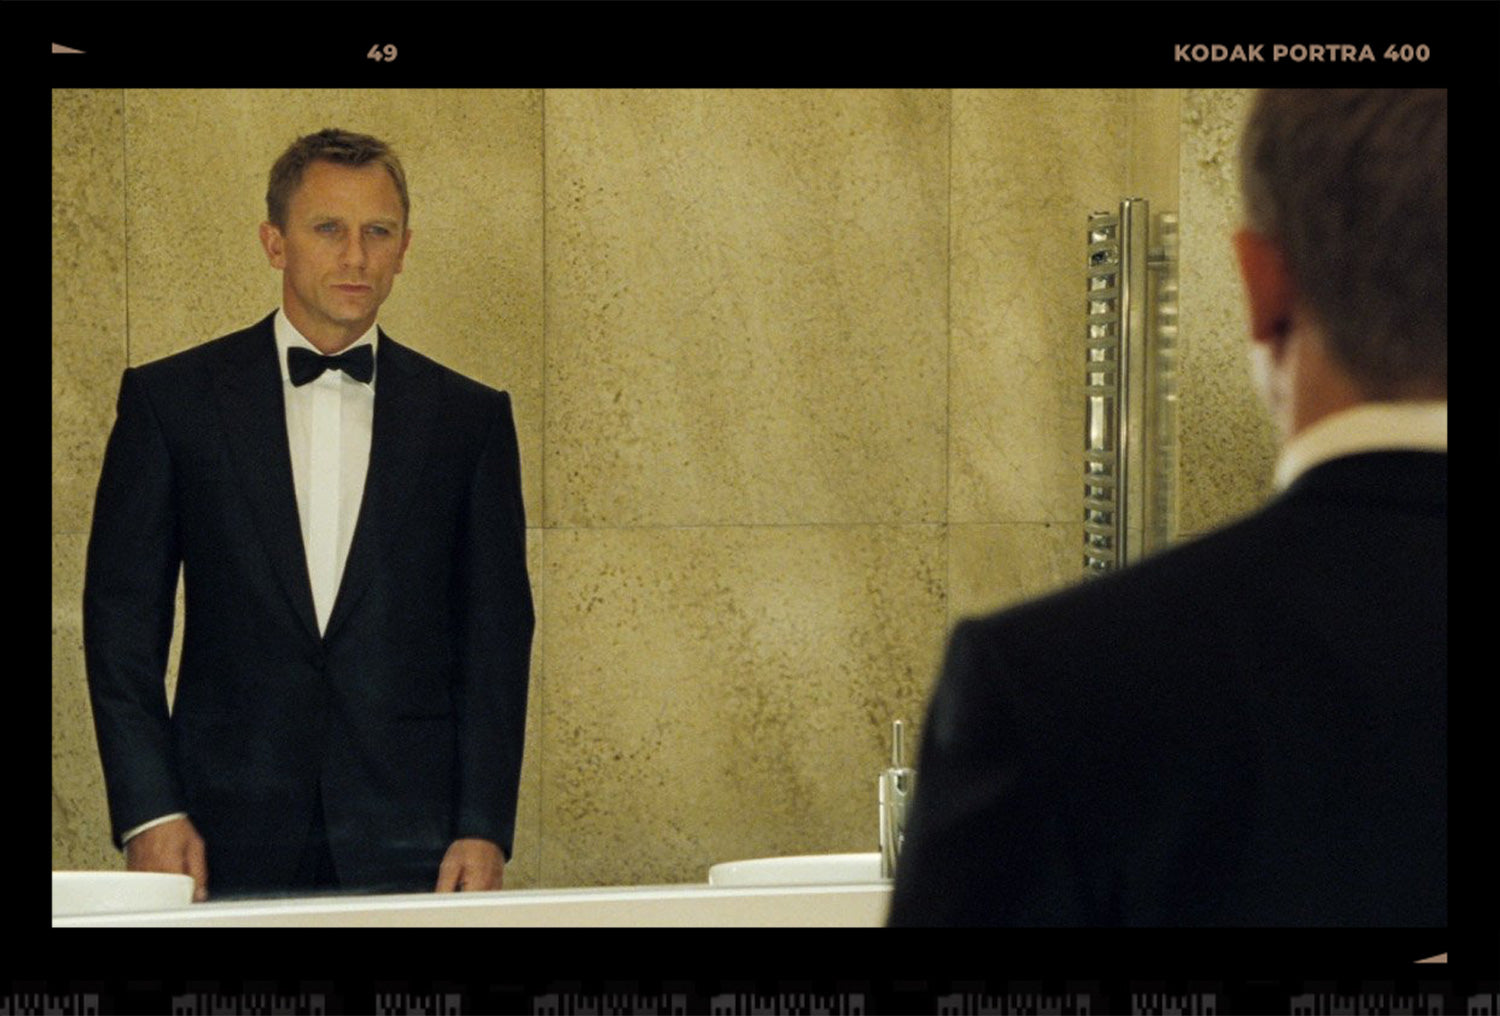 Daniel Craig dons the black tux in his first outing as 007 in Casino Royale